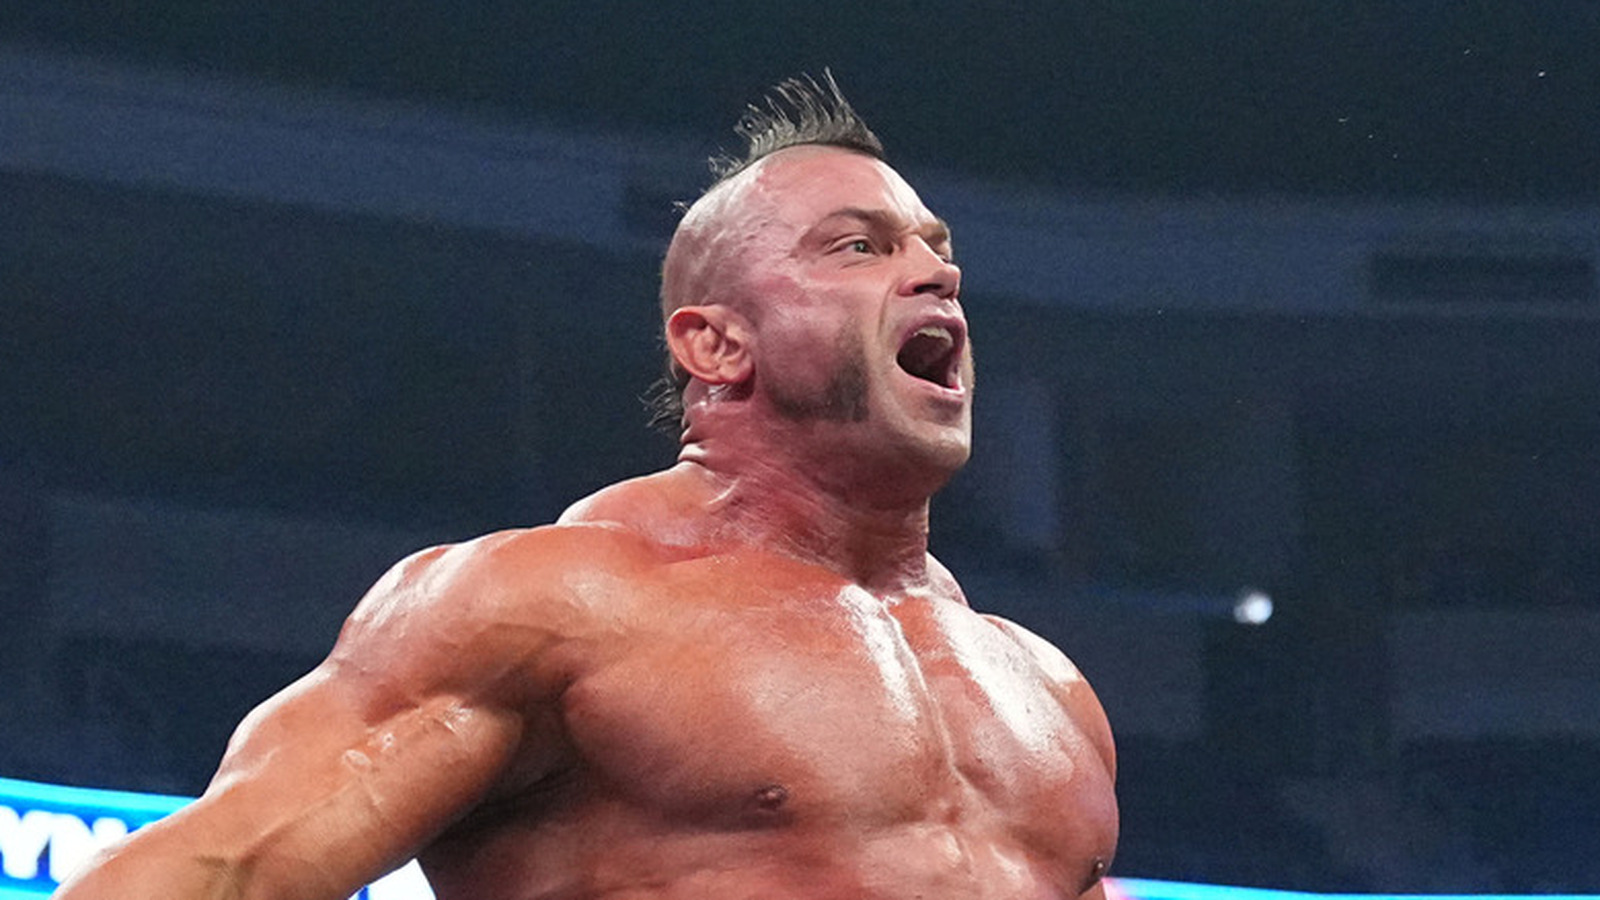 AEW's Brian Cage Announces The Birth Of His Child With Wife Melissa Santos